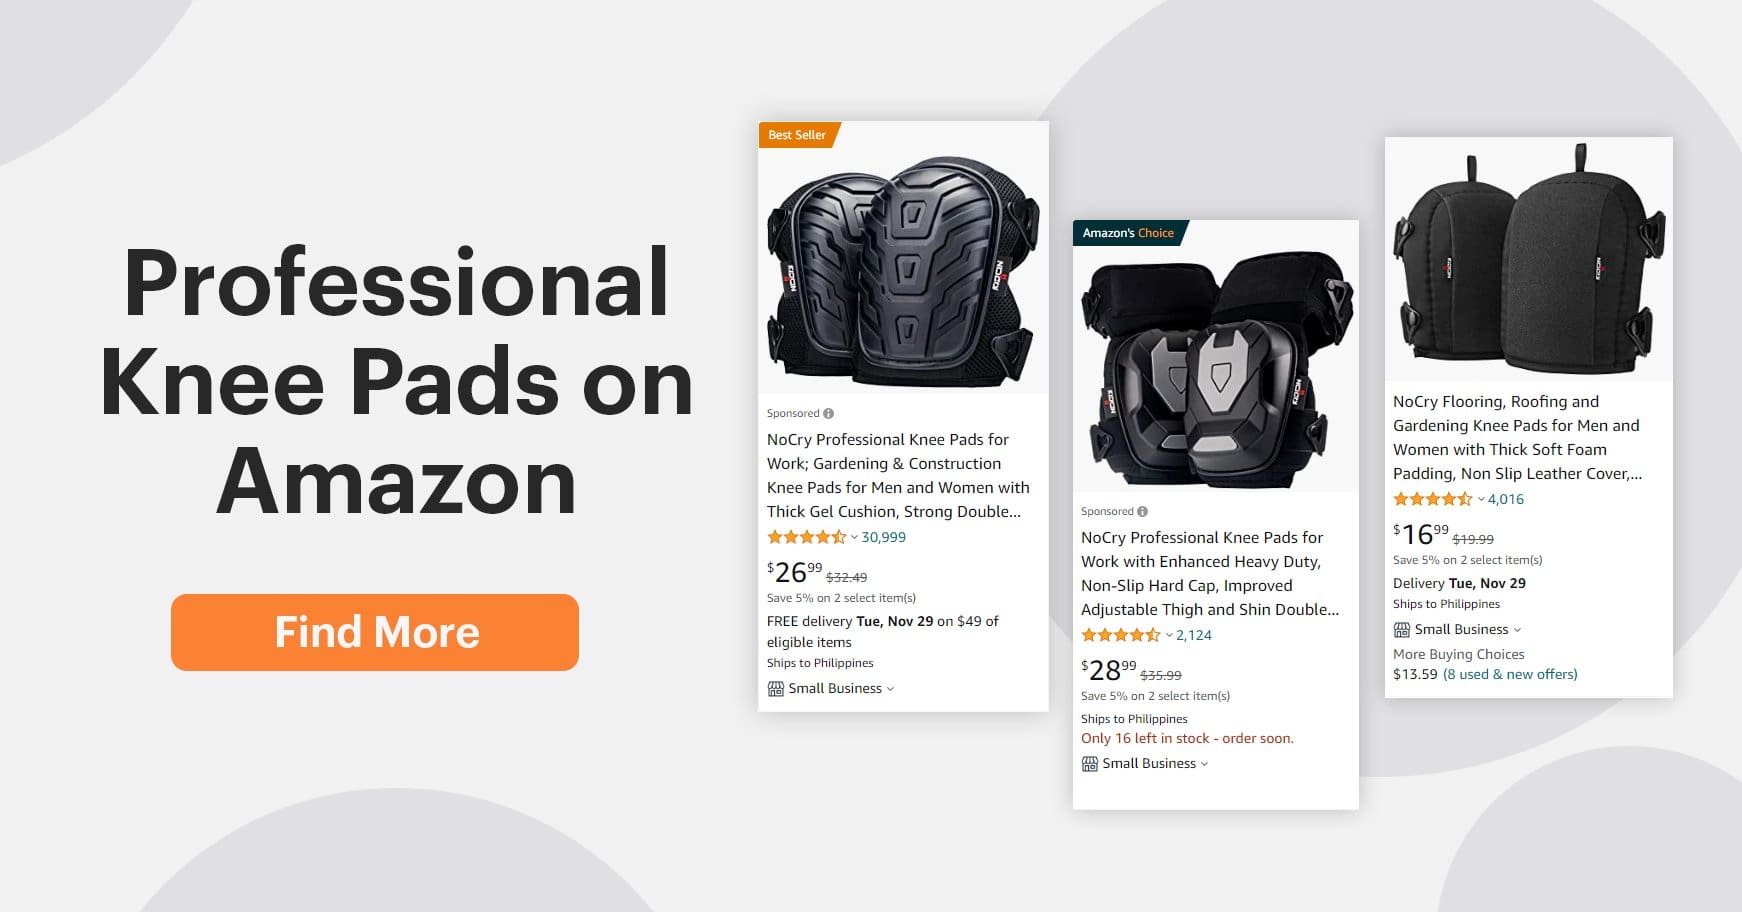 Screenshot of cleaning kneepad from Amazon website